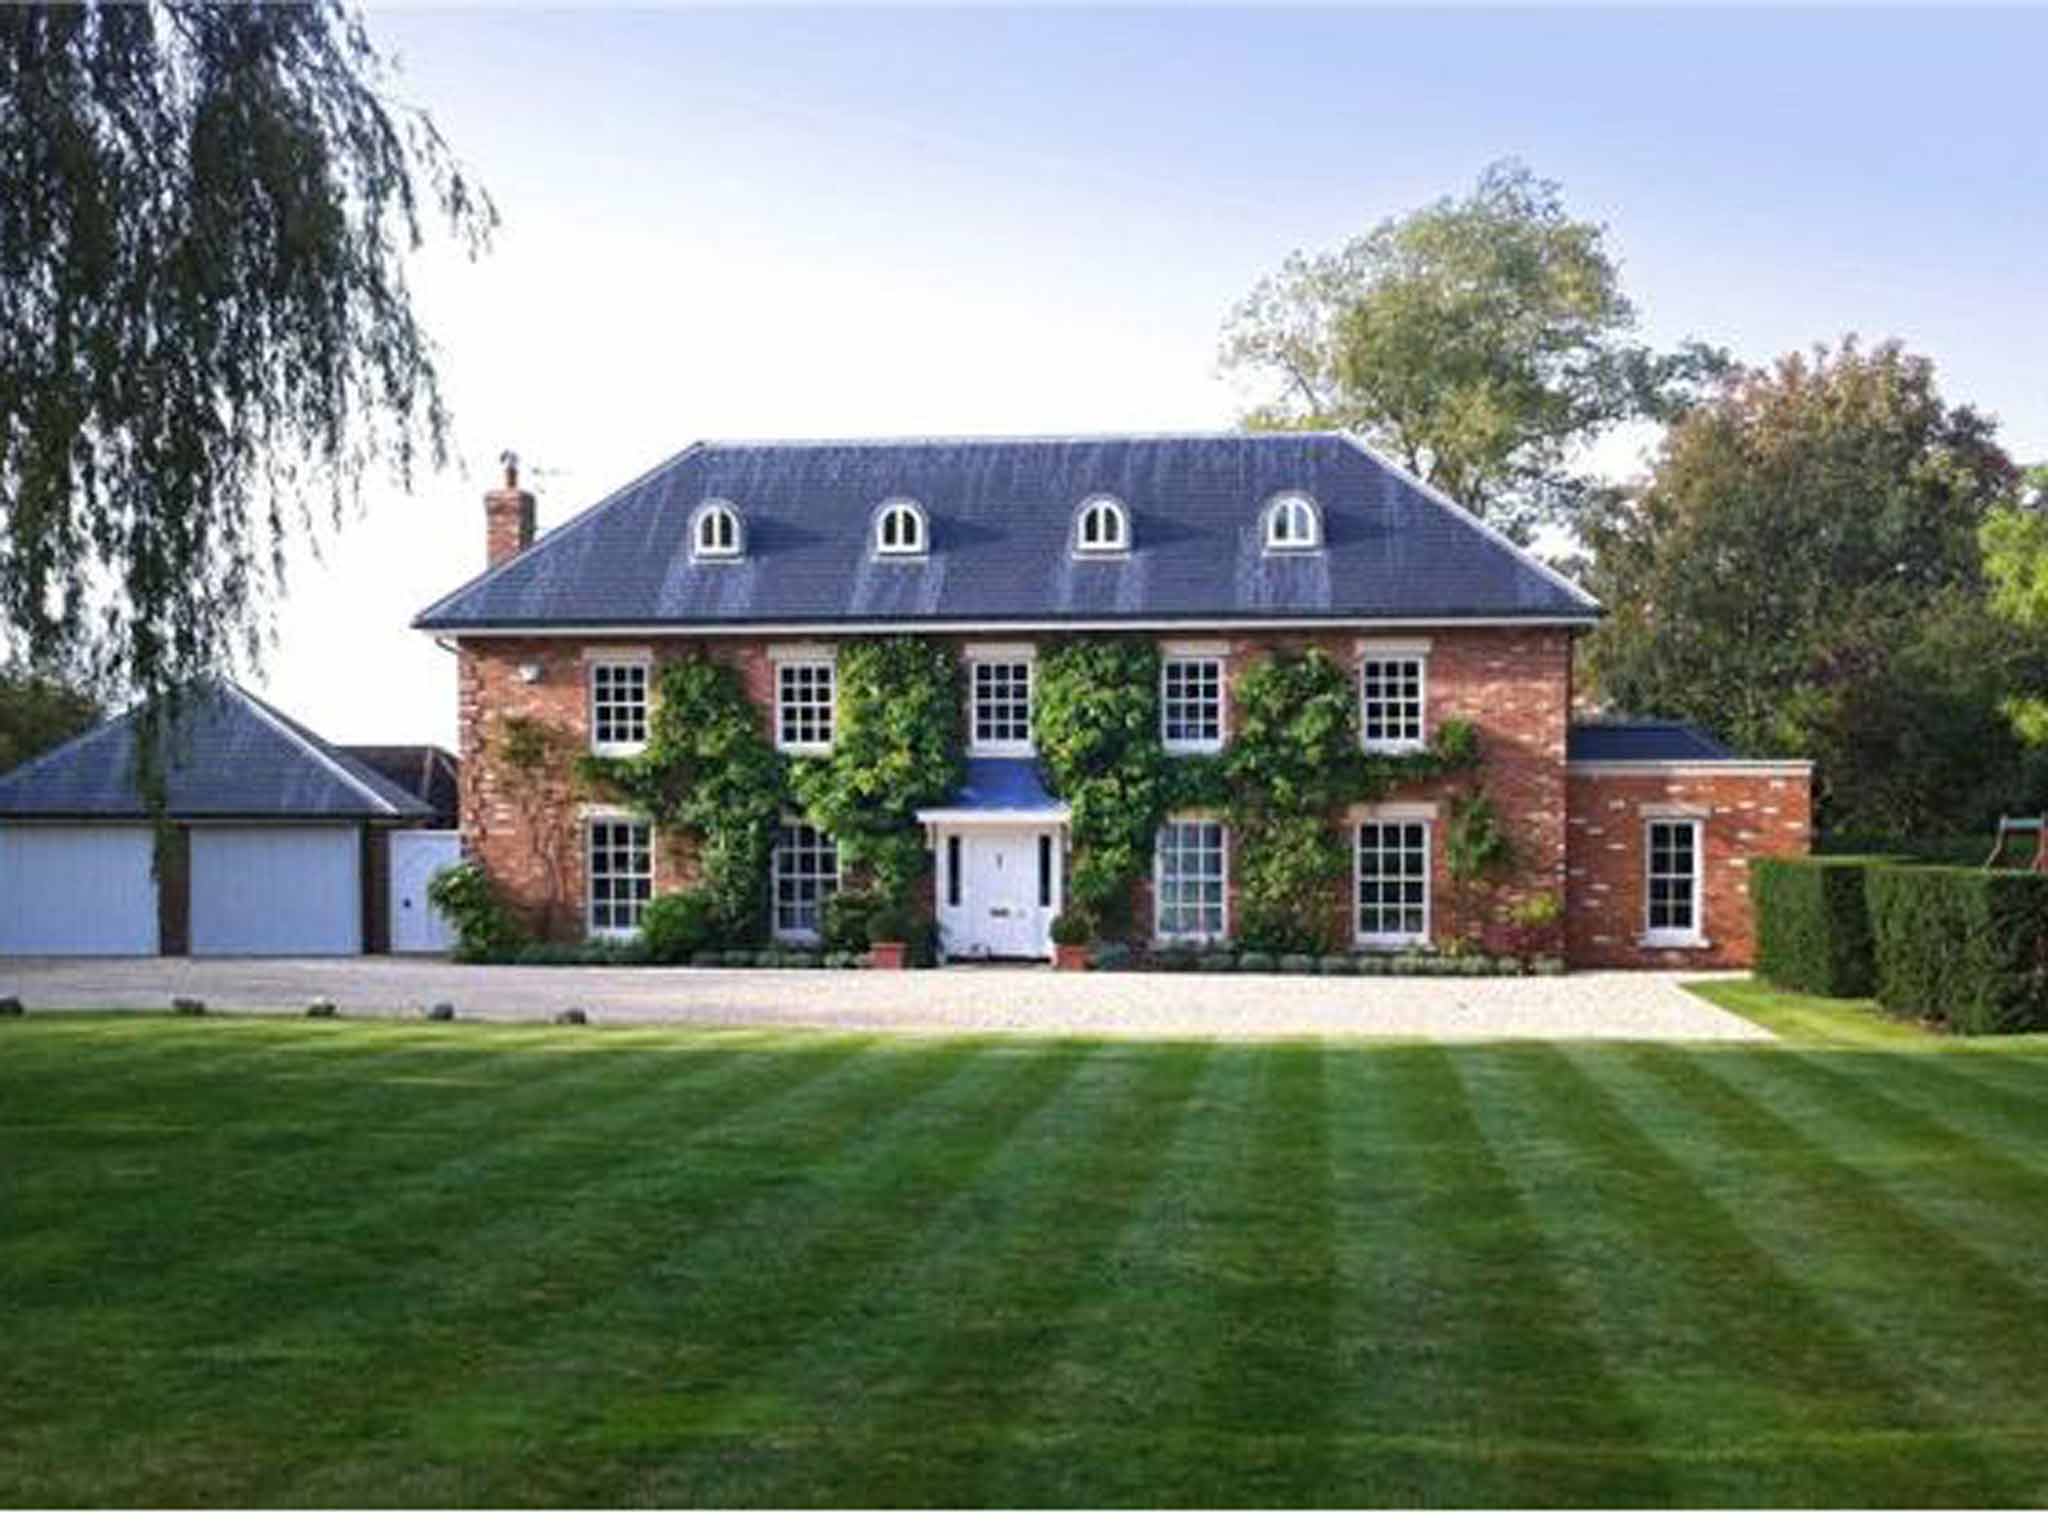 Five bedroom detached house for sale, Hinksey Hill, Oxford, Oxfordshire OX1. On with Savills at a guide price of £2,500,000.